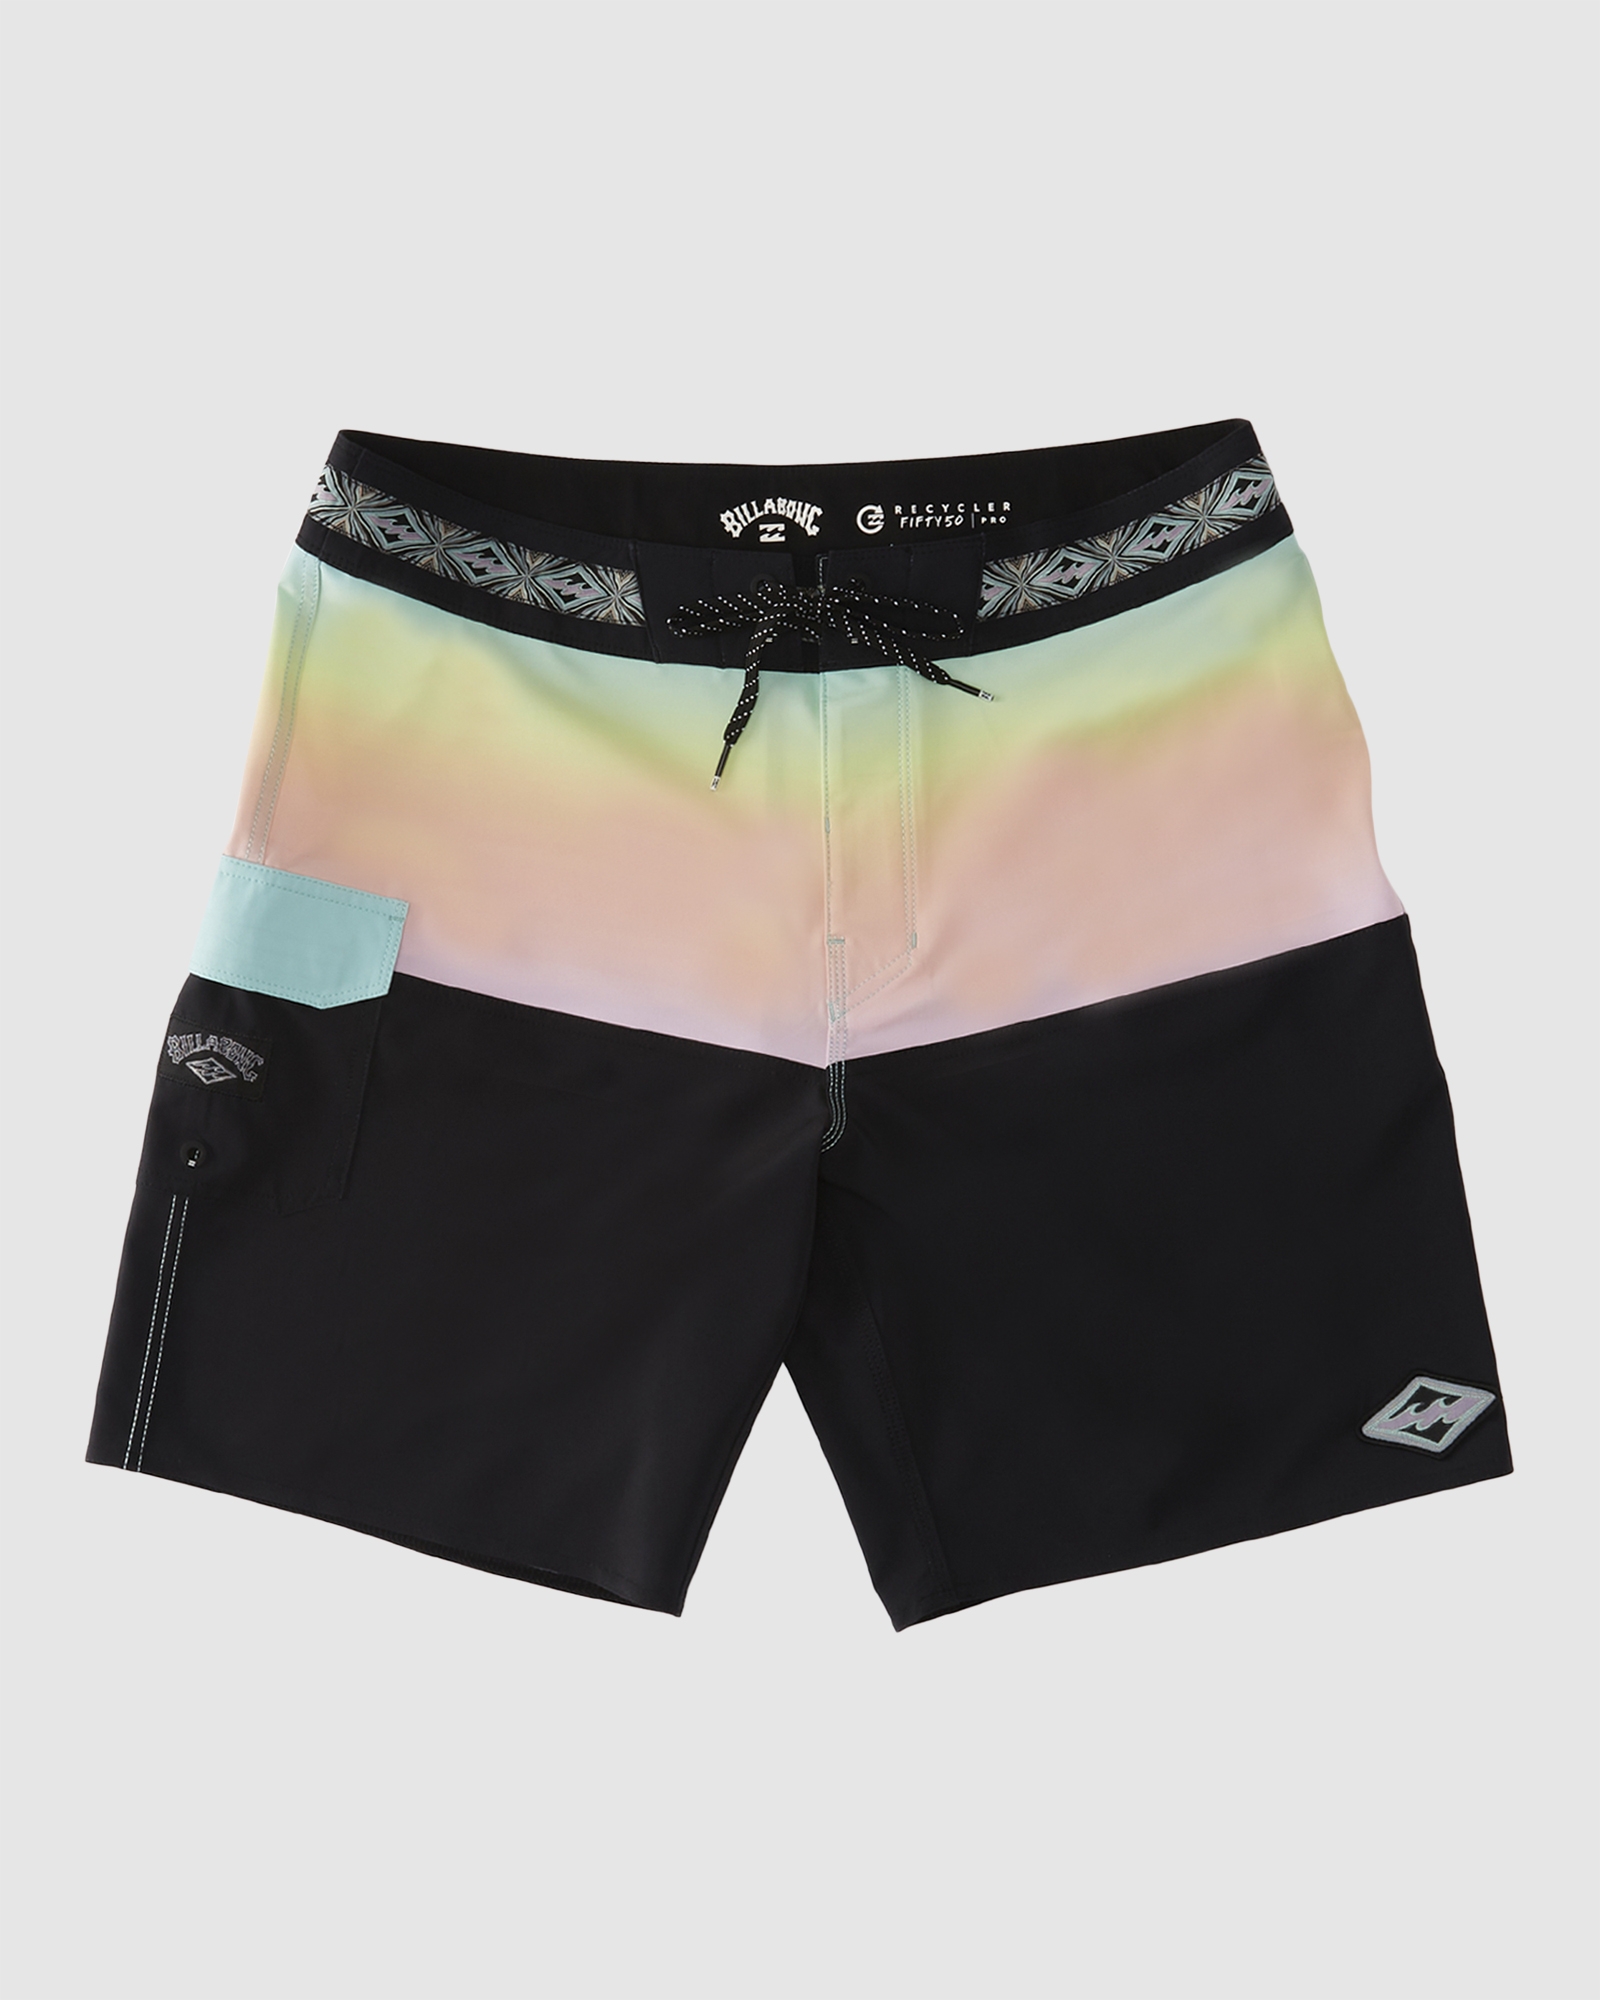 Burleigh Pro - Performance Board Shorts for Men